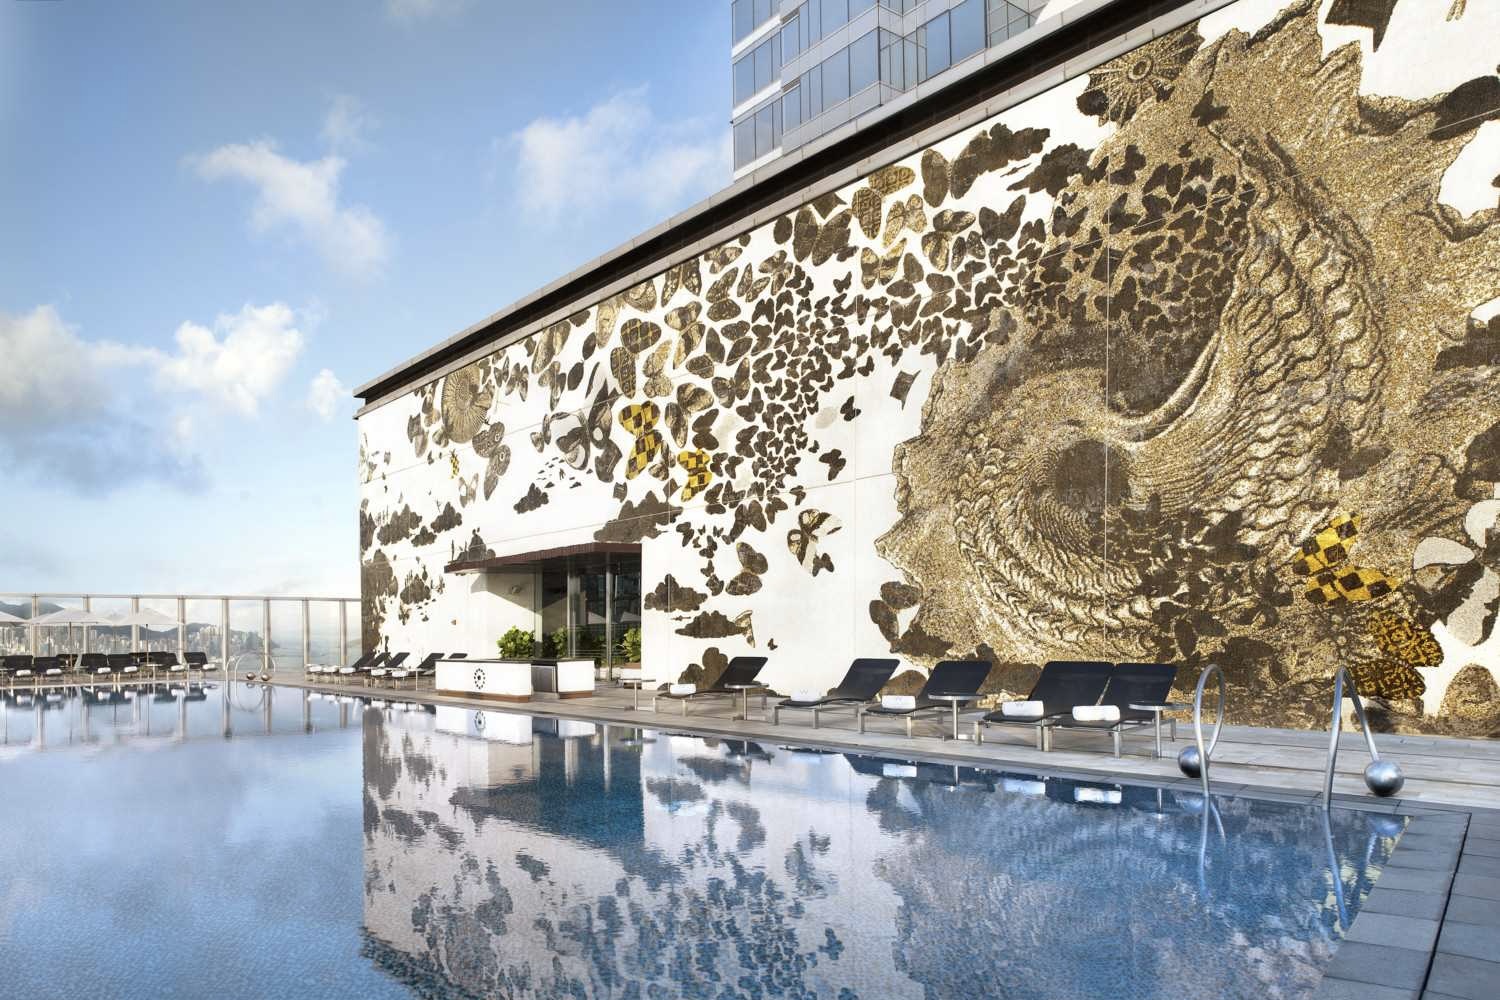 A partial view of the swimming pool of the W Hong Kong, which is lined with deck chairs and overlooks Victoria Harbour. A stunning nature-inspired mural adorns the wall of the building leading into the fitness centre.